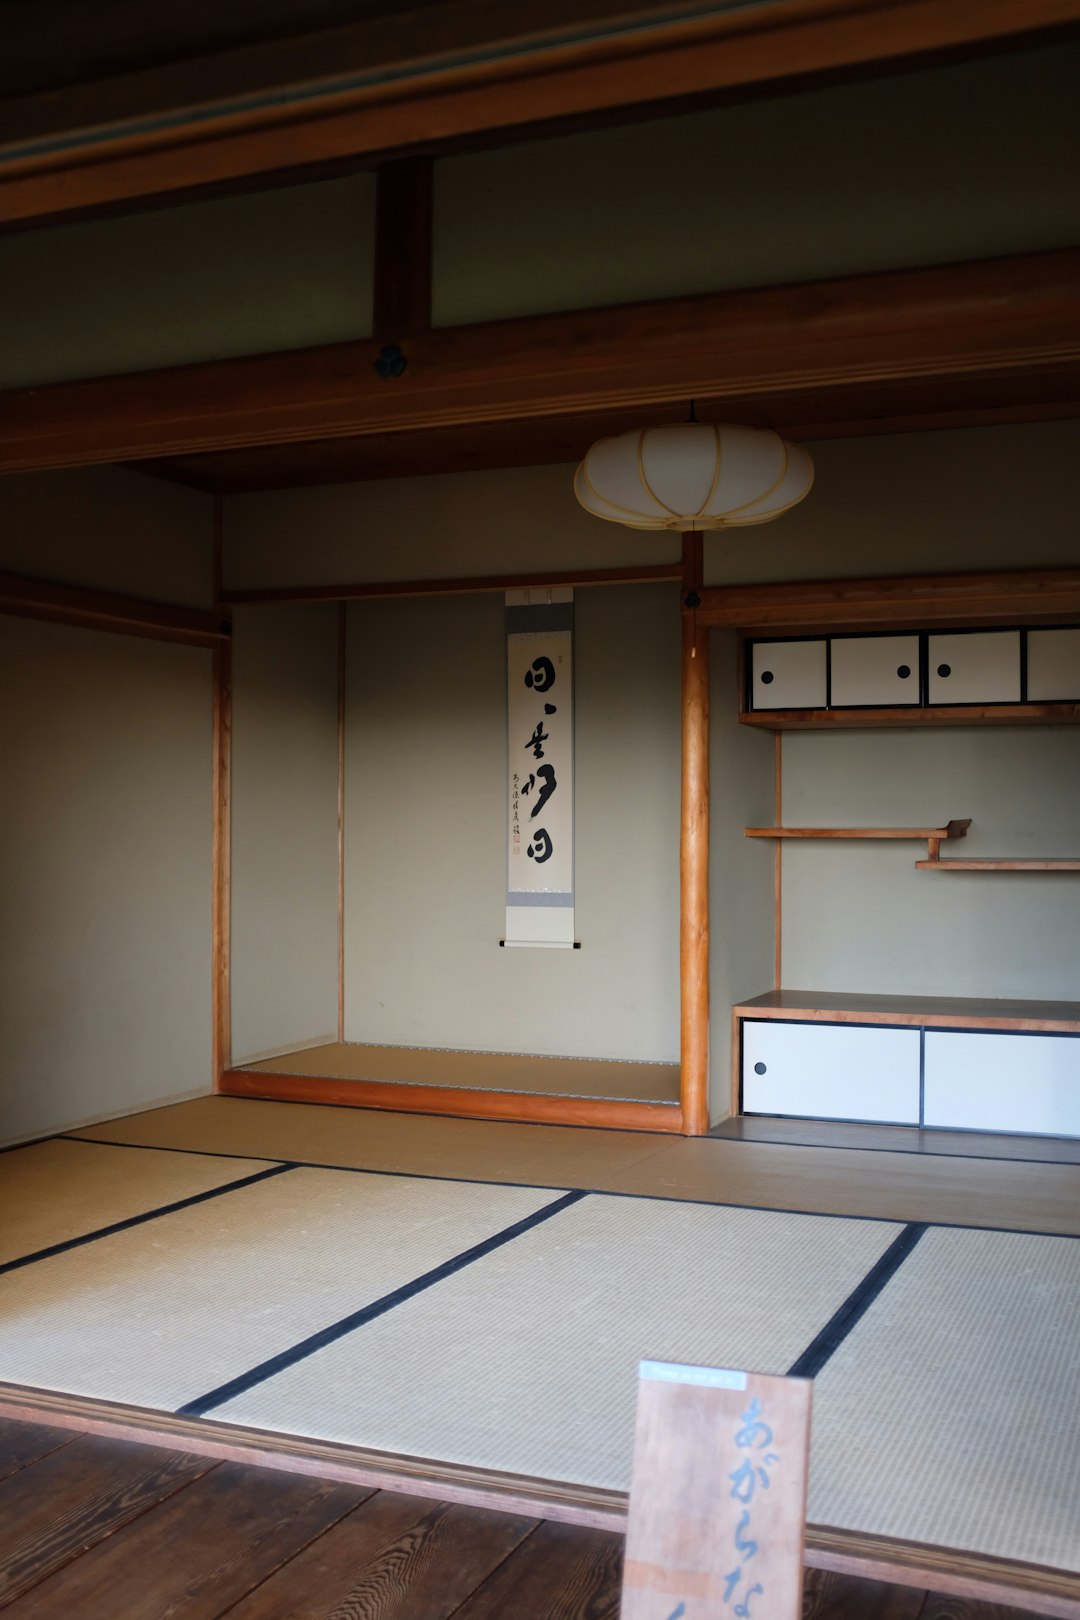 room with kanji signage and turned-off ceiling light